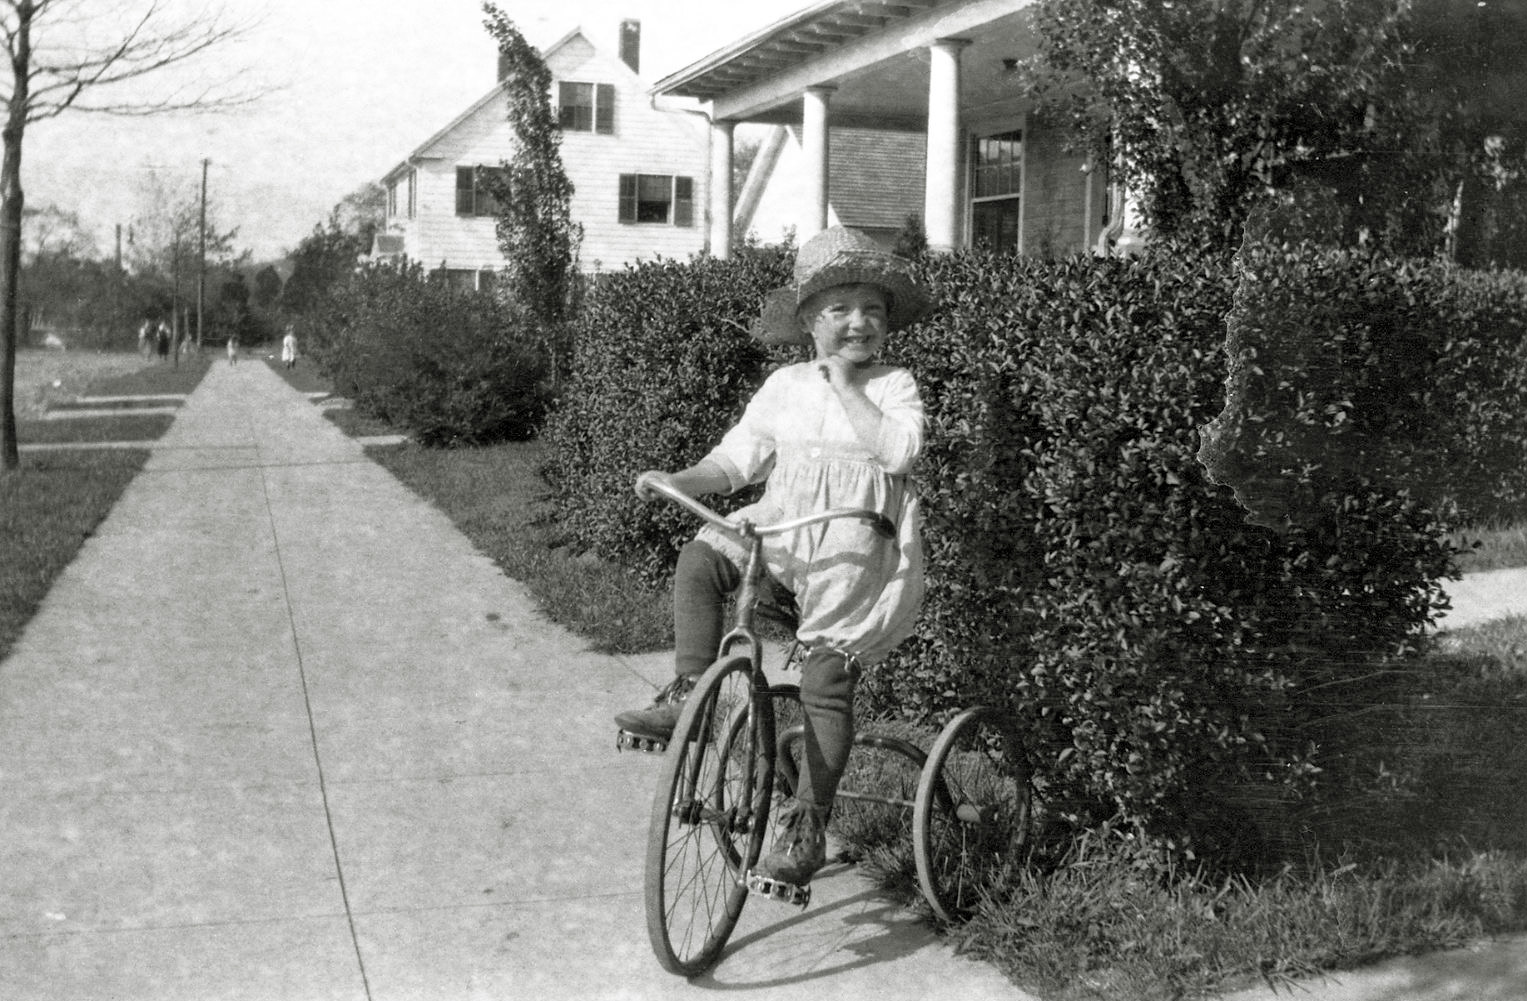 Young girl happily riding around the neighborhood on her tricycle. From my negatives collection. View full size.